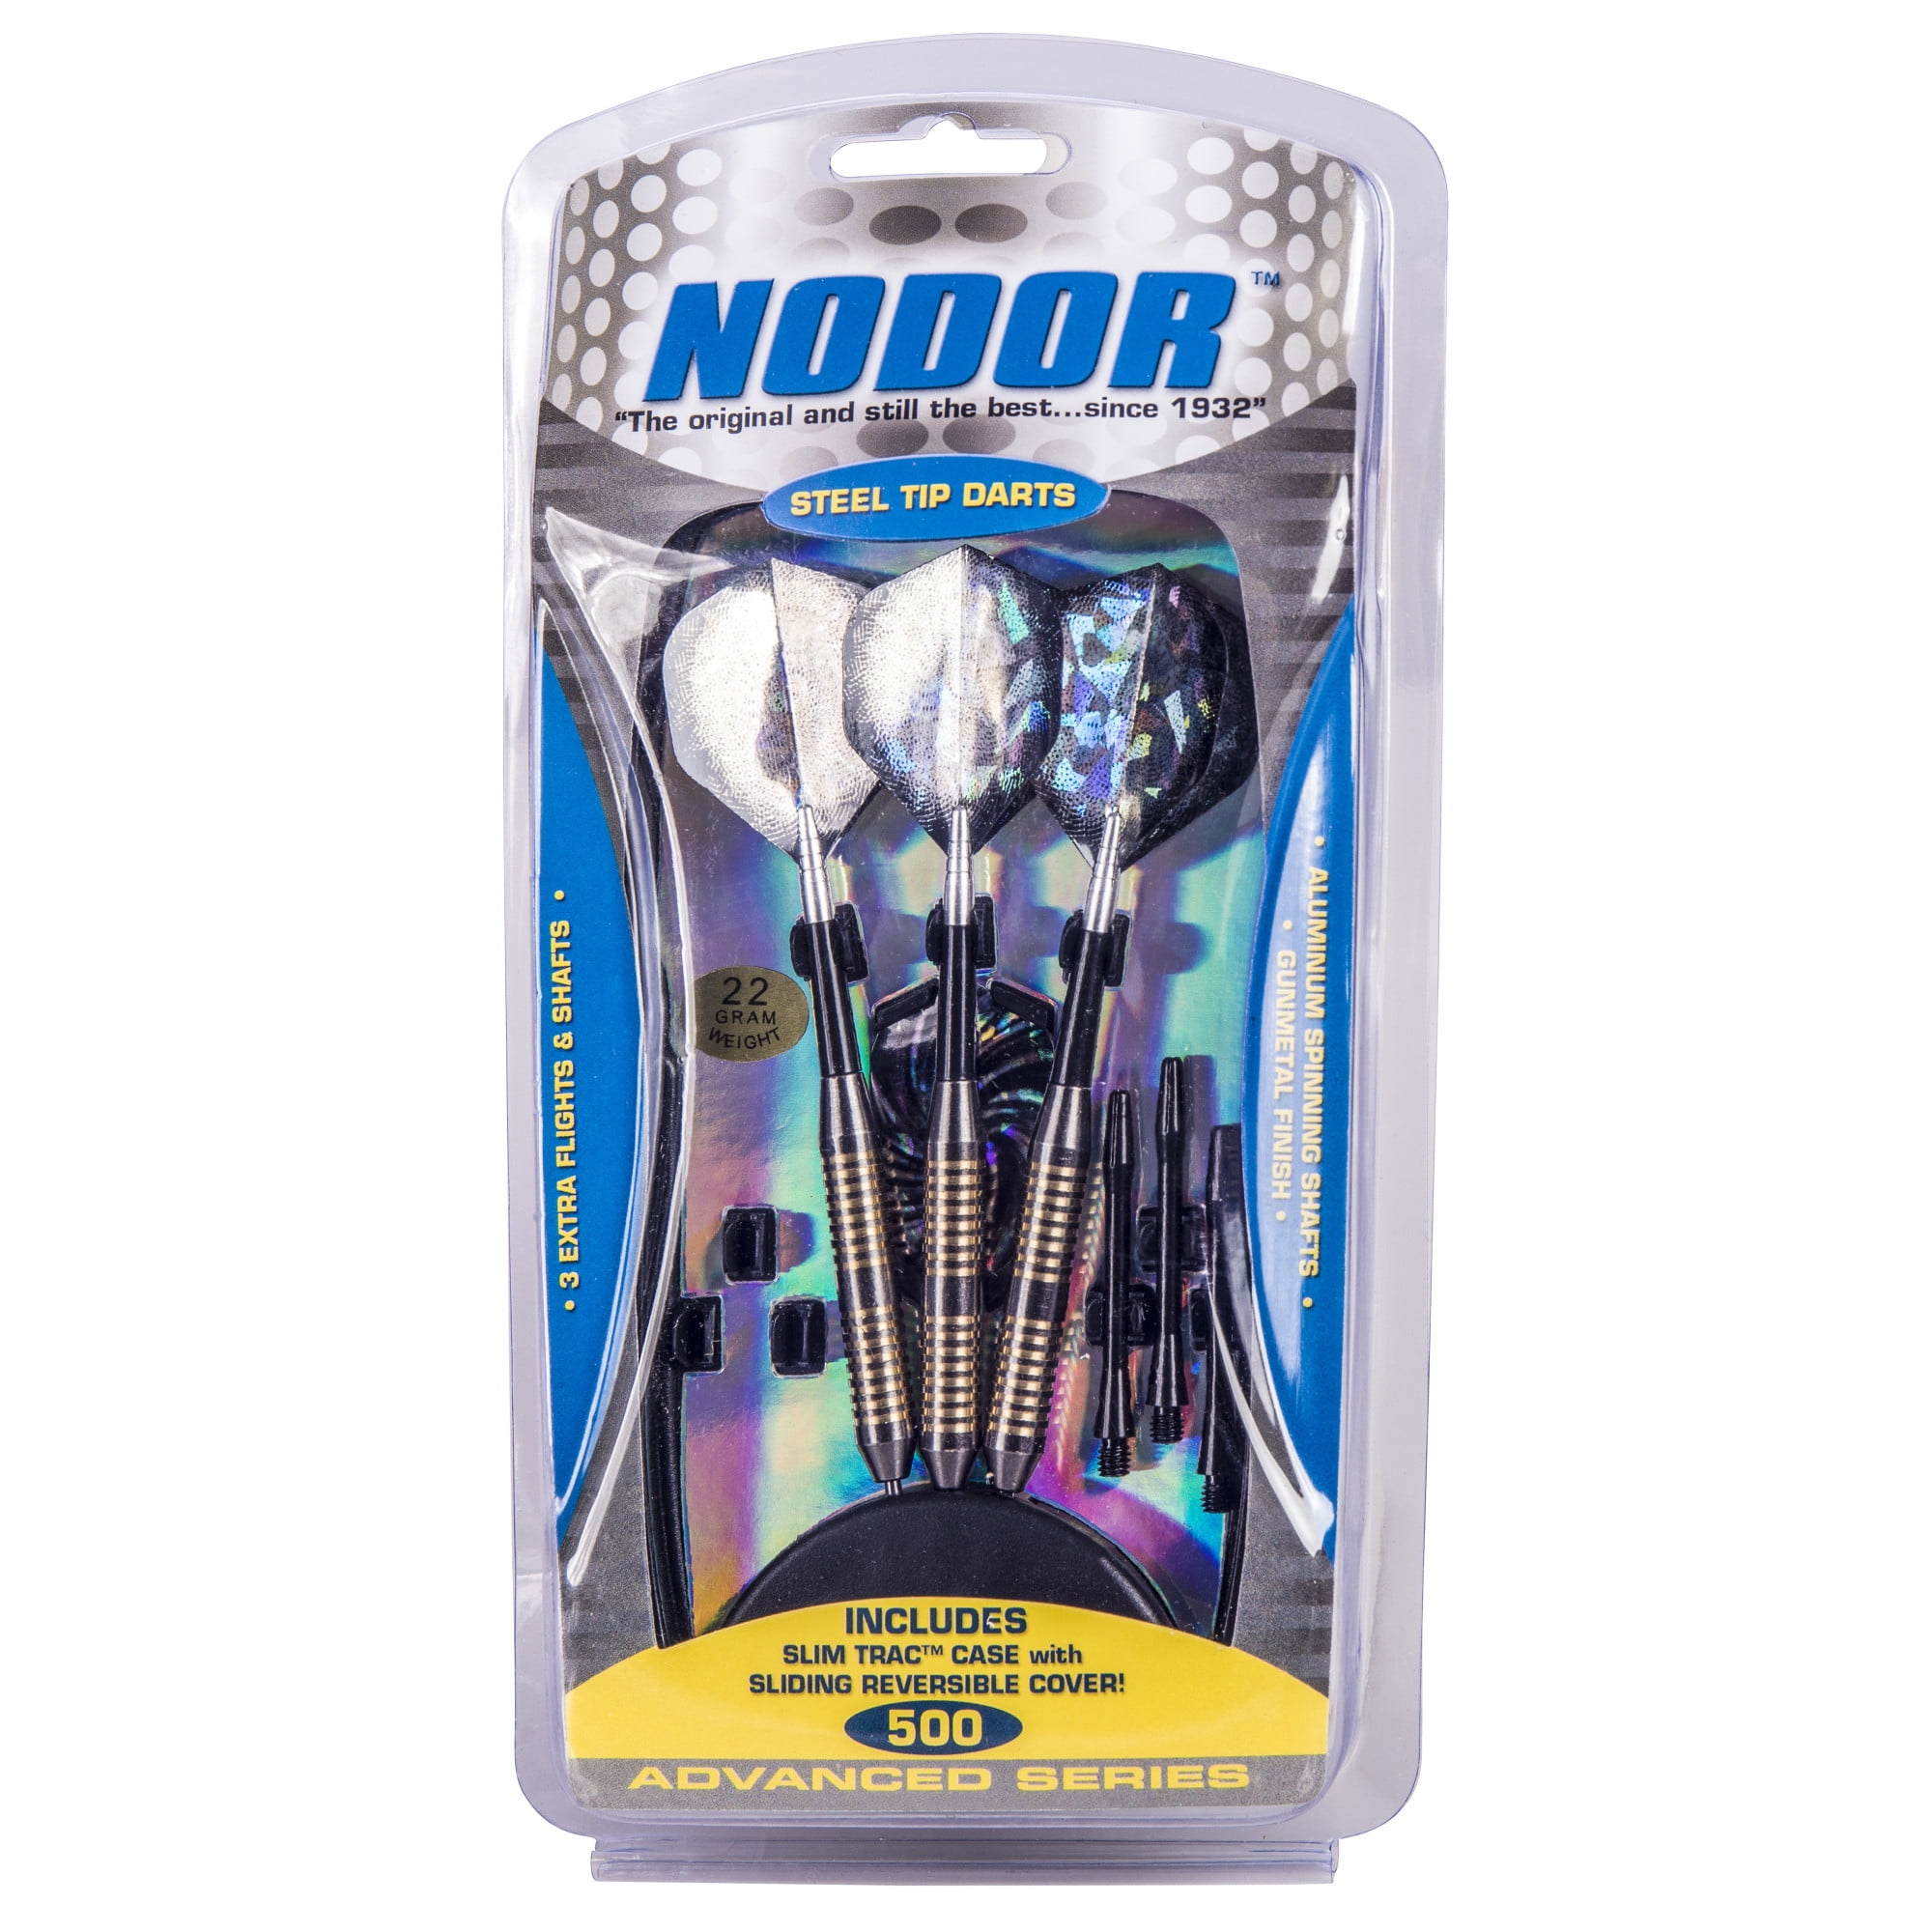 One or Two Sets 24 Gram Nodor Brass Darts with Stems & Flights 